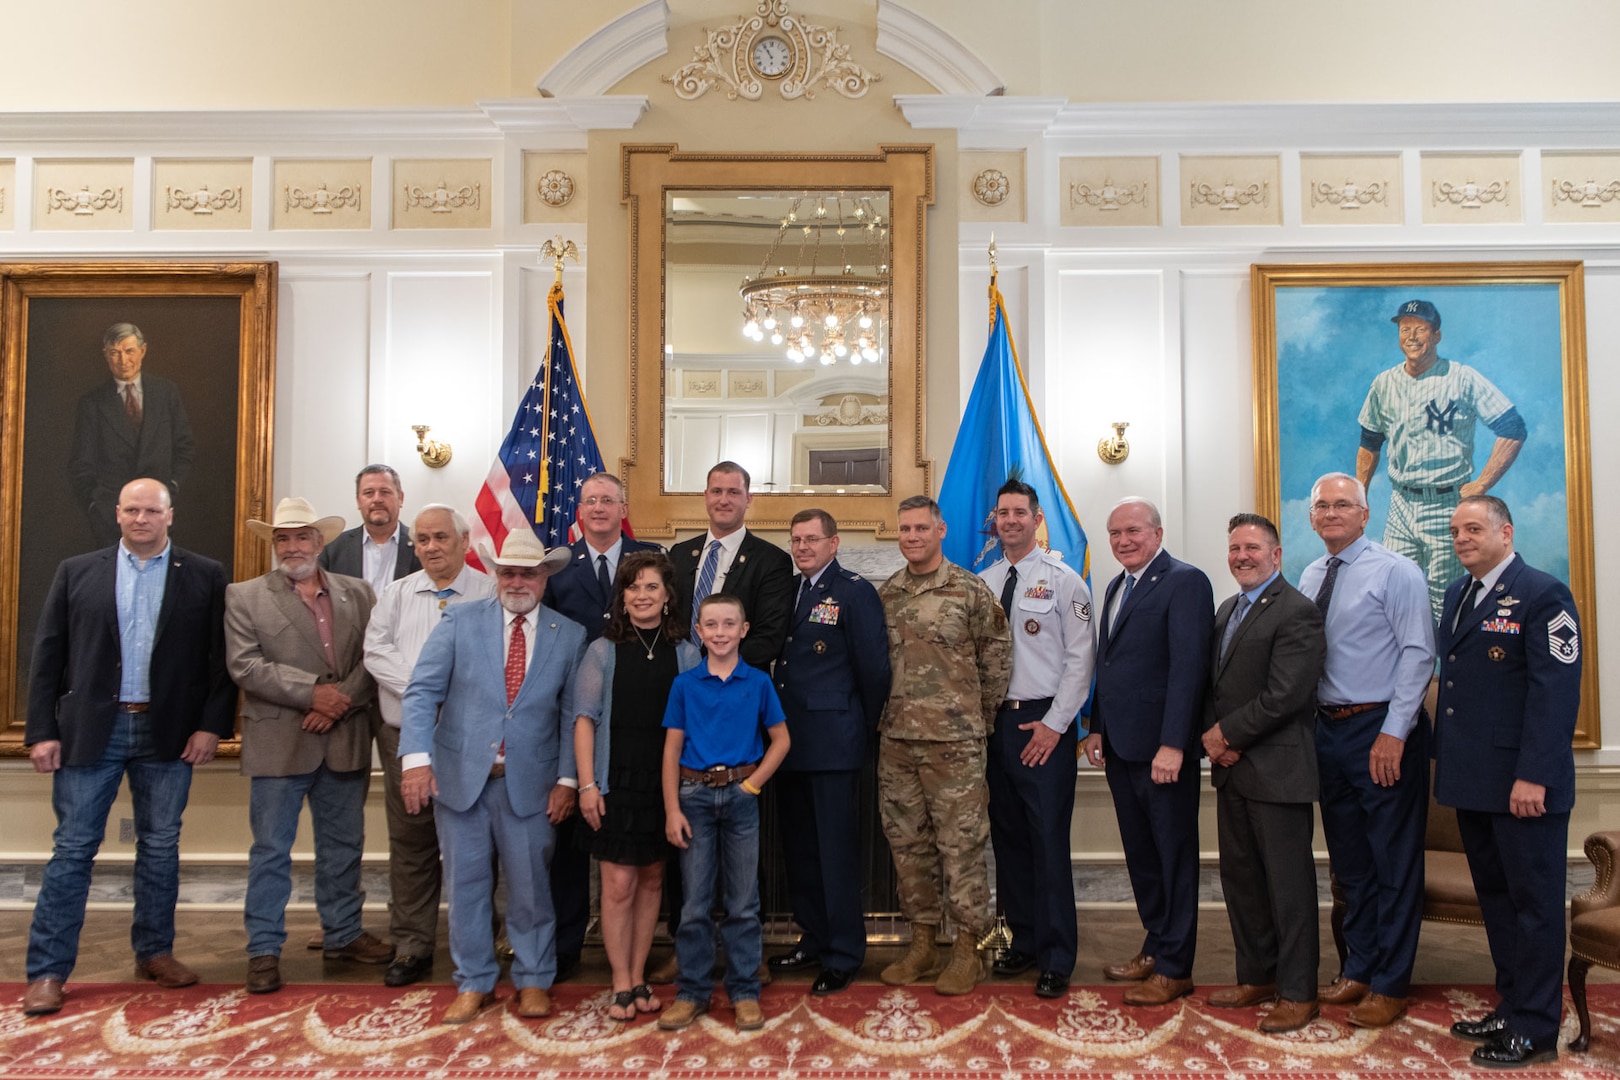 Tom Woods, an Oklahoma state senator, is accompanied by guests at his enlistment ceremony at the Oklahoma State Capitol on June 26, 2023, Oklahoma City. Woods enlisted into the Oklahoma ANG to serve beyond his congressional district and will attend Air Force basic military training and security forces technical training between state senate sessions. (U.S. Air National Guard photo by Airman Erika Chapa)